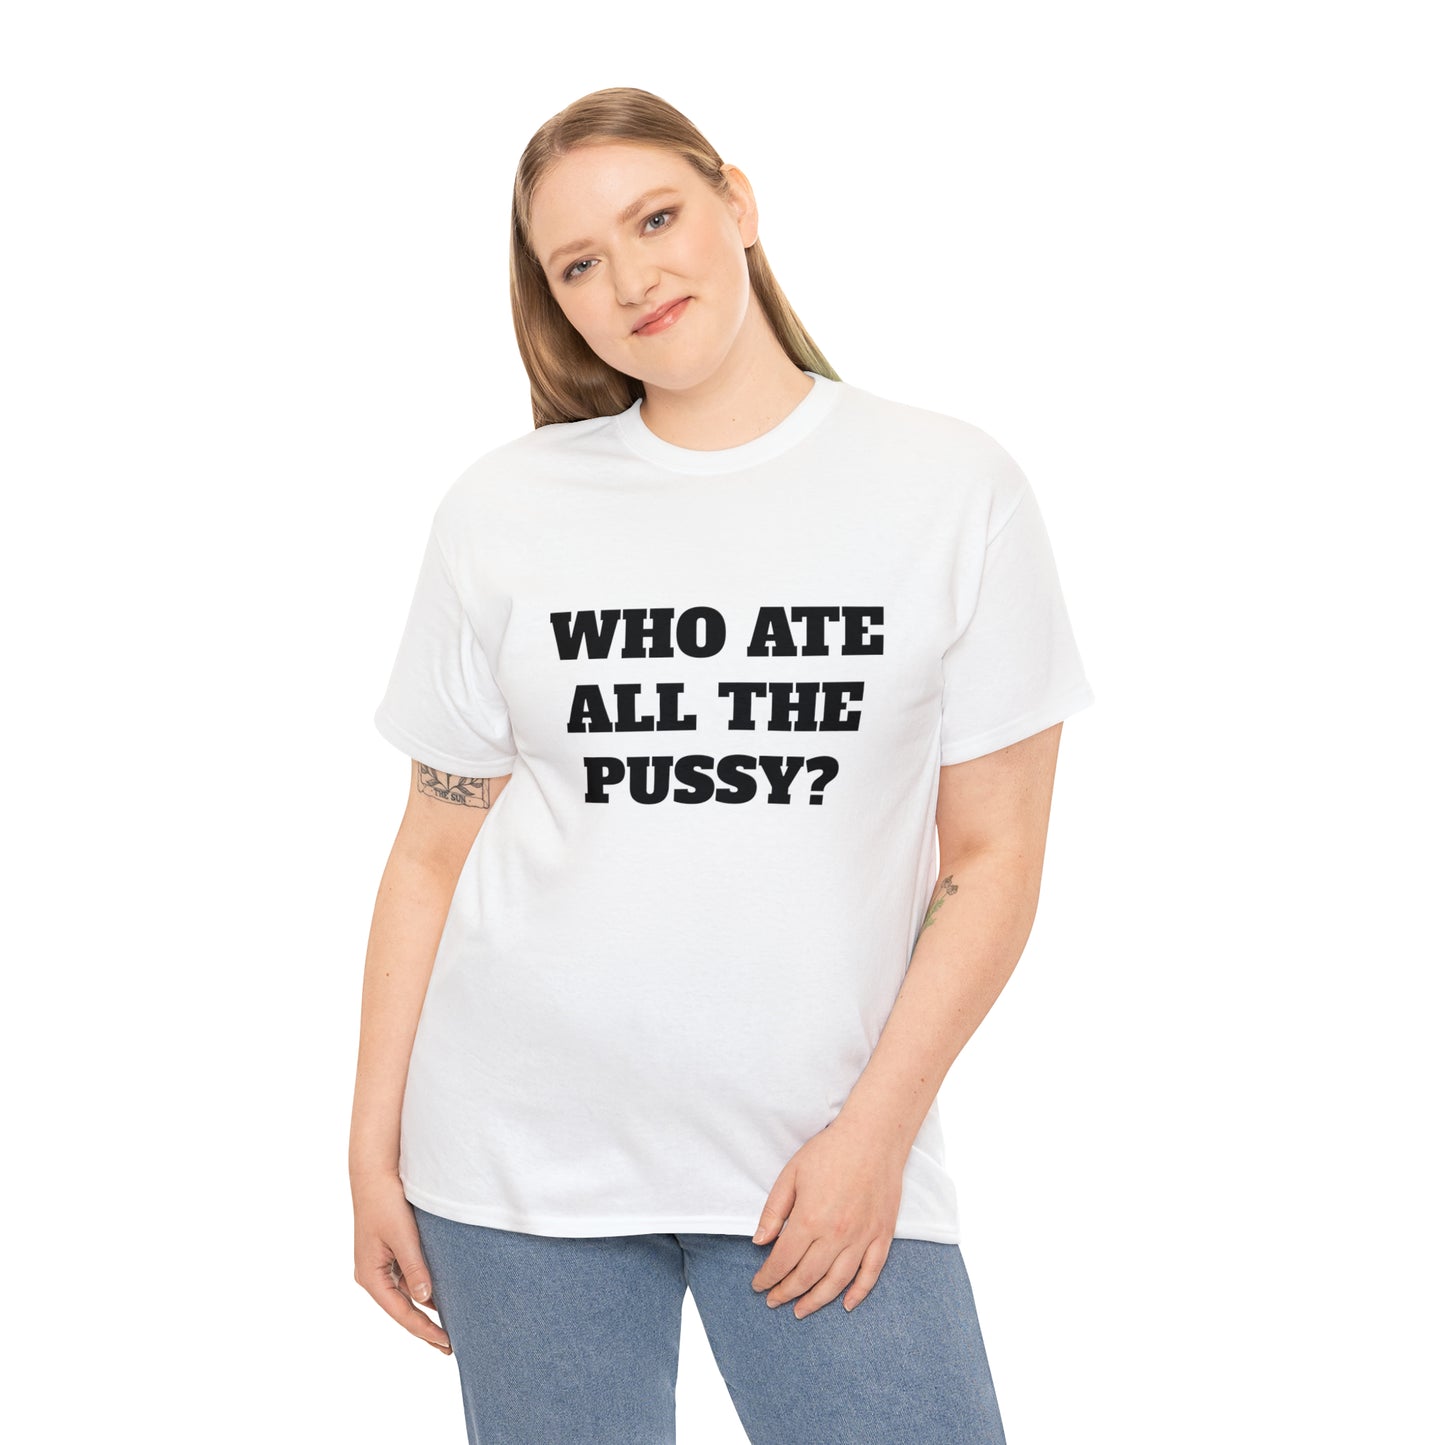 WHO ATE ALL THE PUSSY T-SHIRT